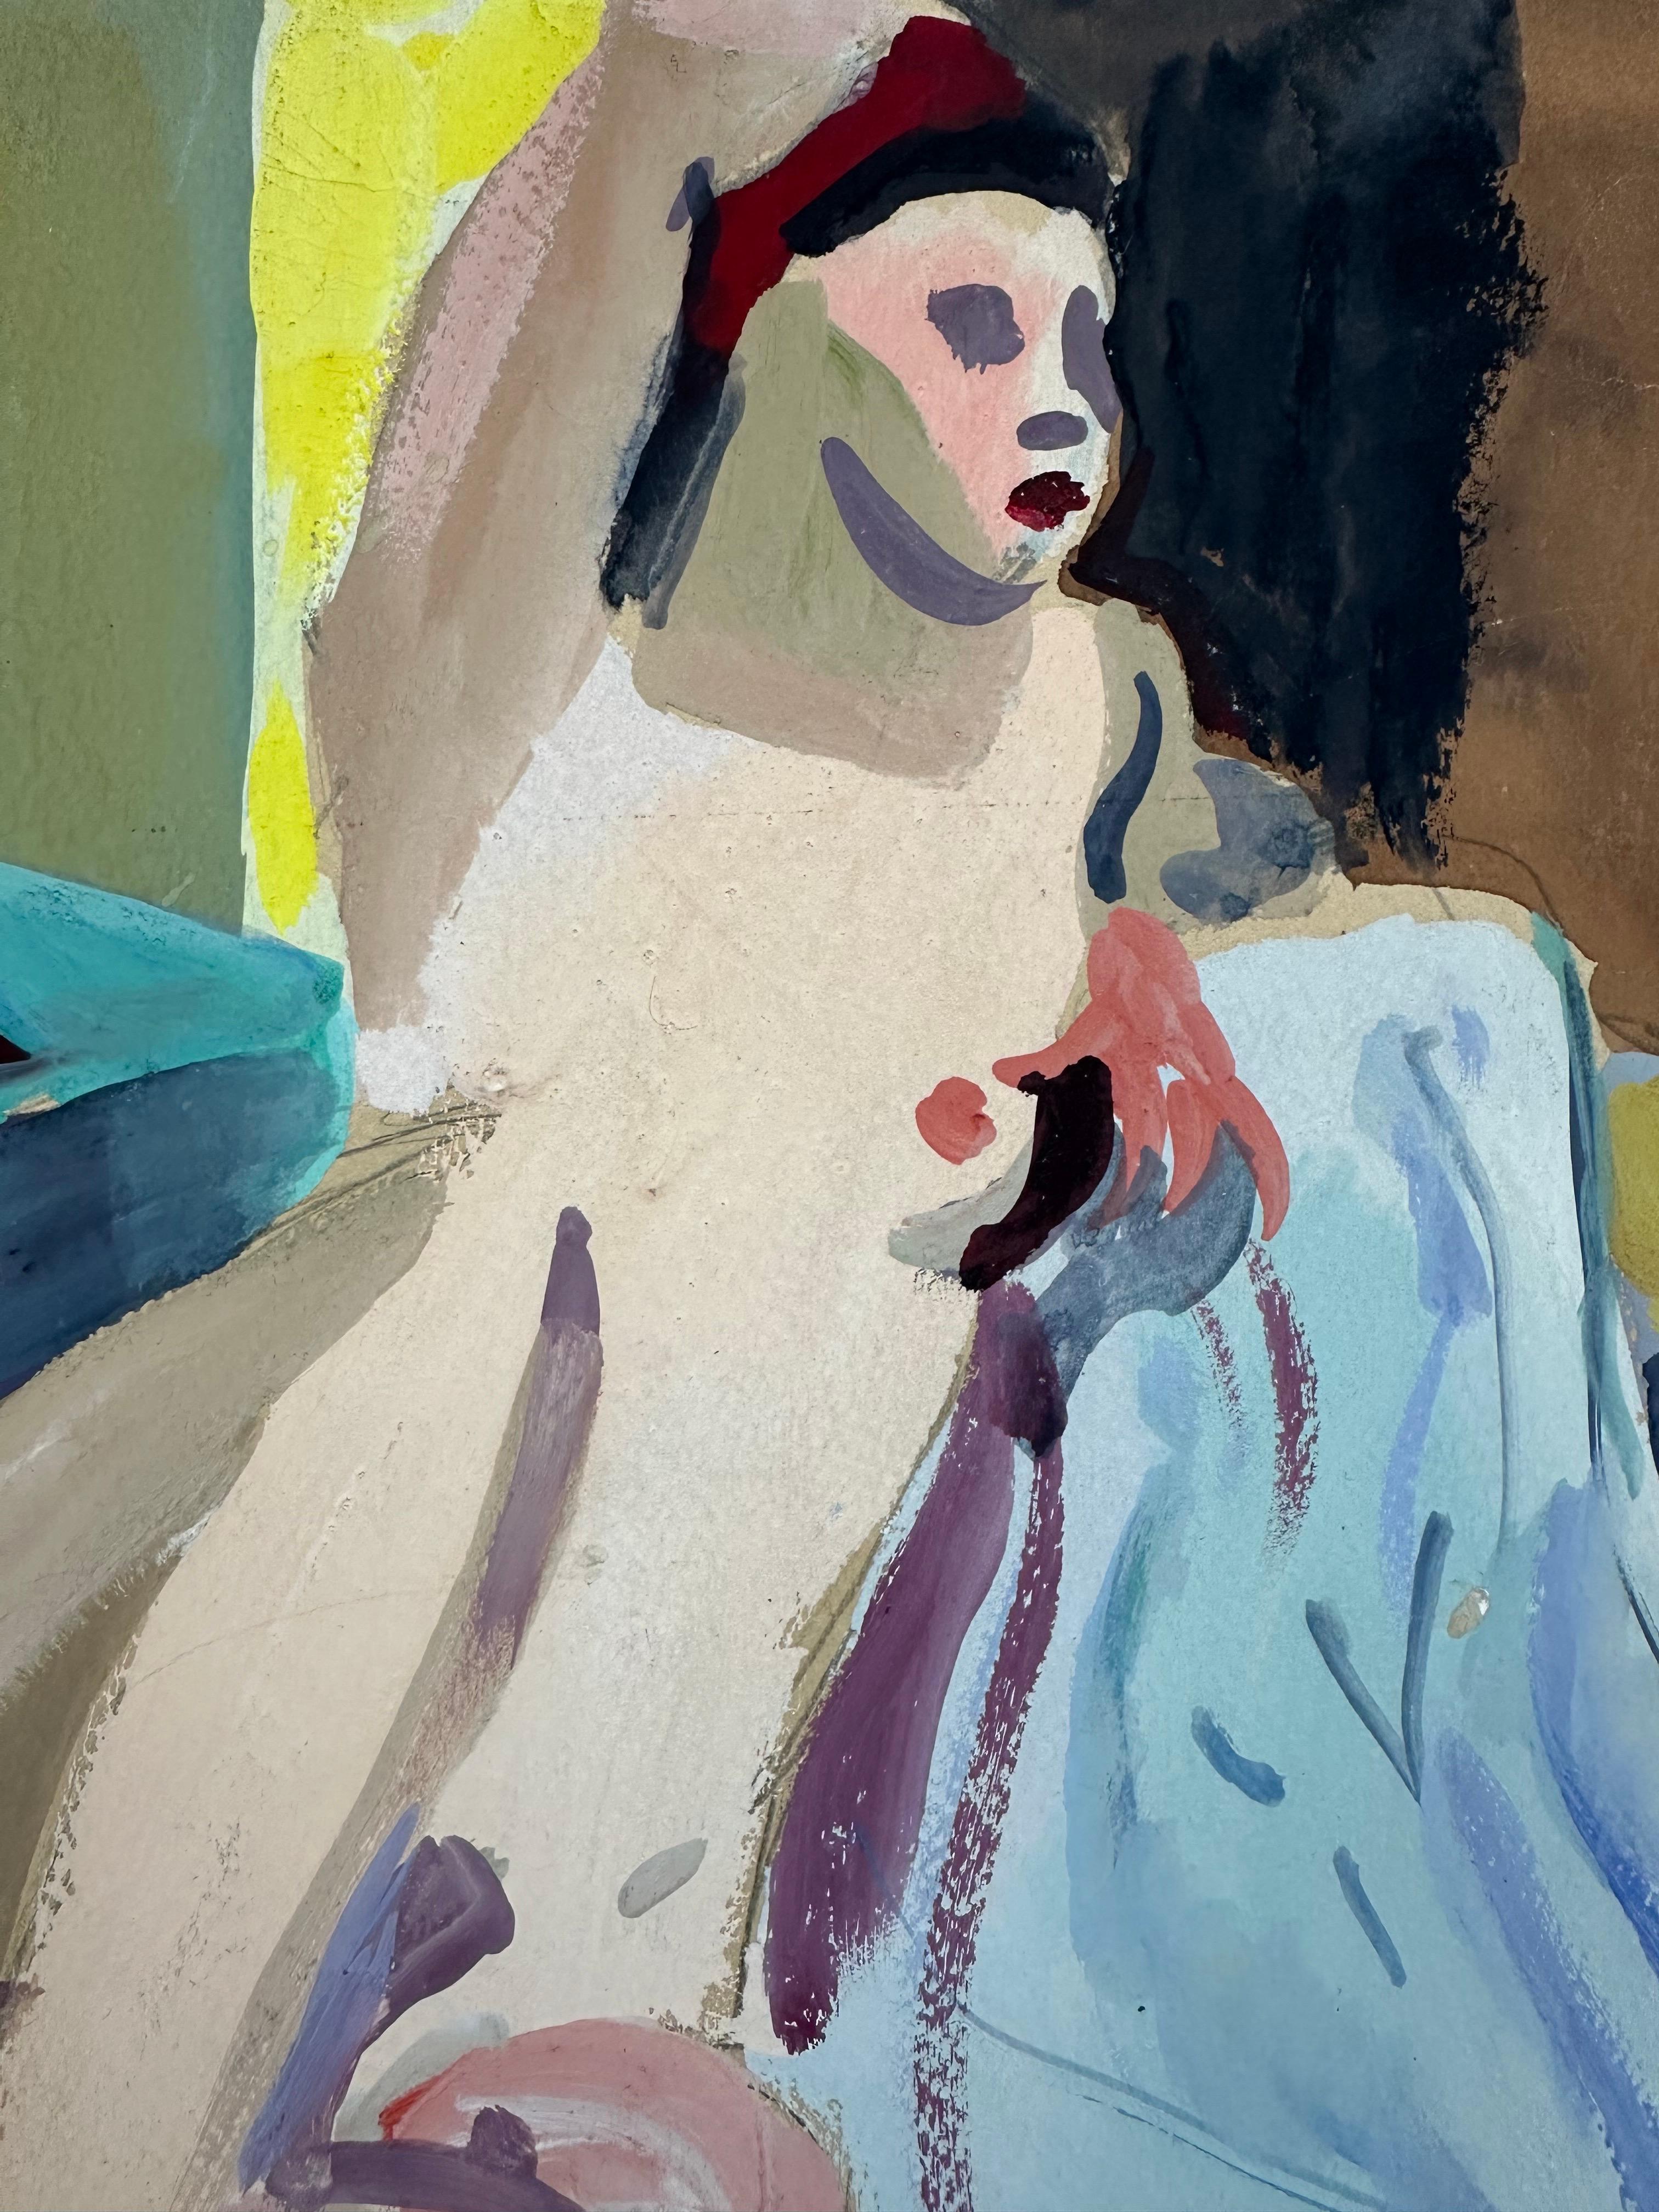 Joseph Kardonne (1911-1985).

Nude Woman, 1949.

Gouache on paper, sheet measures 13.5 x 13.5 inches. Image measures 12 x 12 inches. 

Signed, dated and titled lower right. Unframed. Excellent condition.

Born in Newark, New Jersey in 1911, Joe